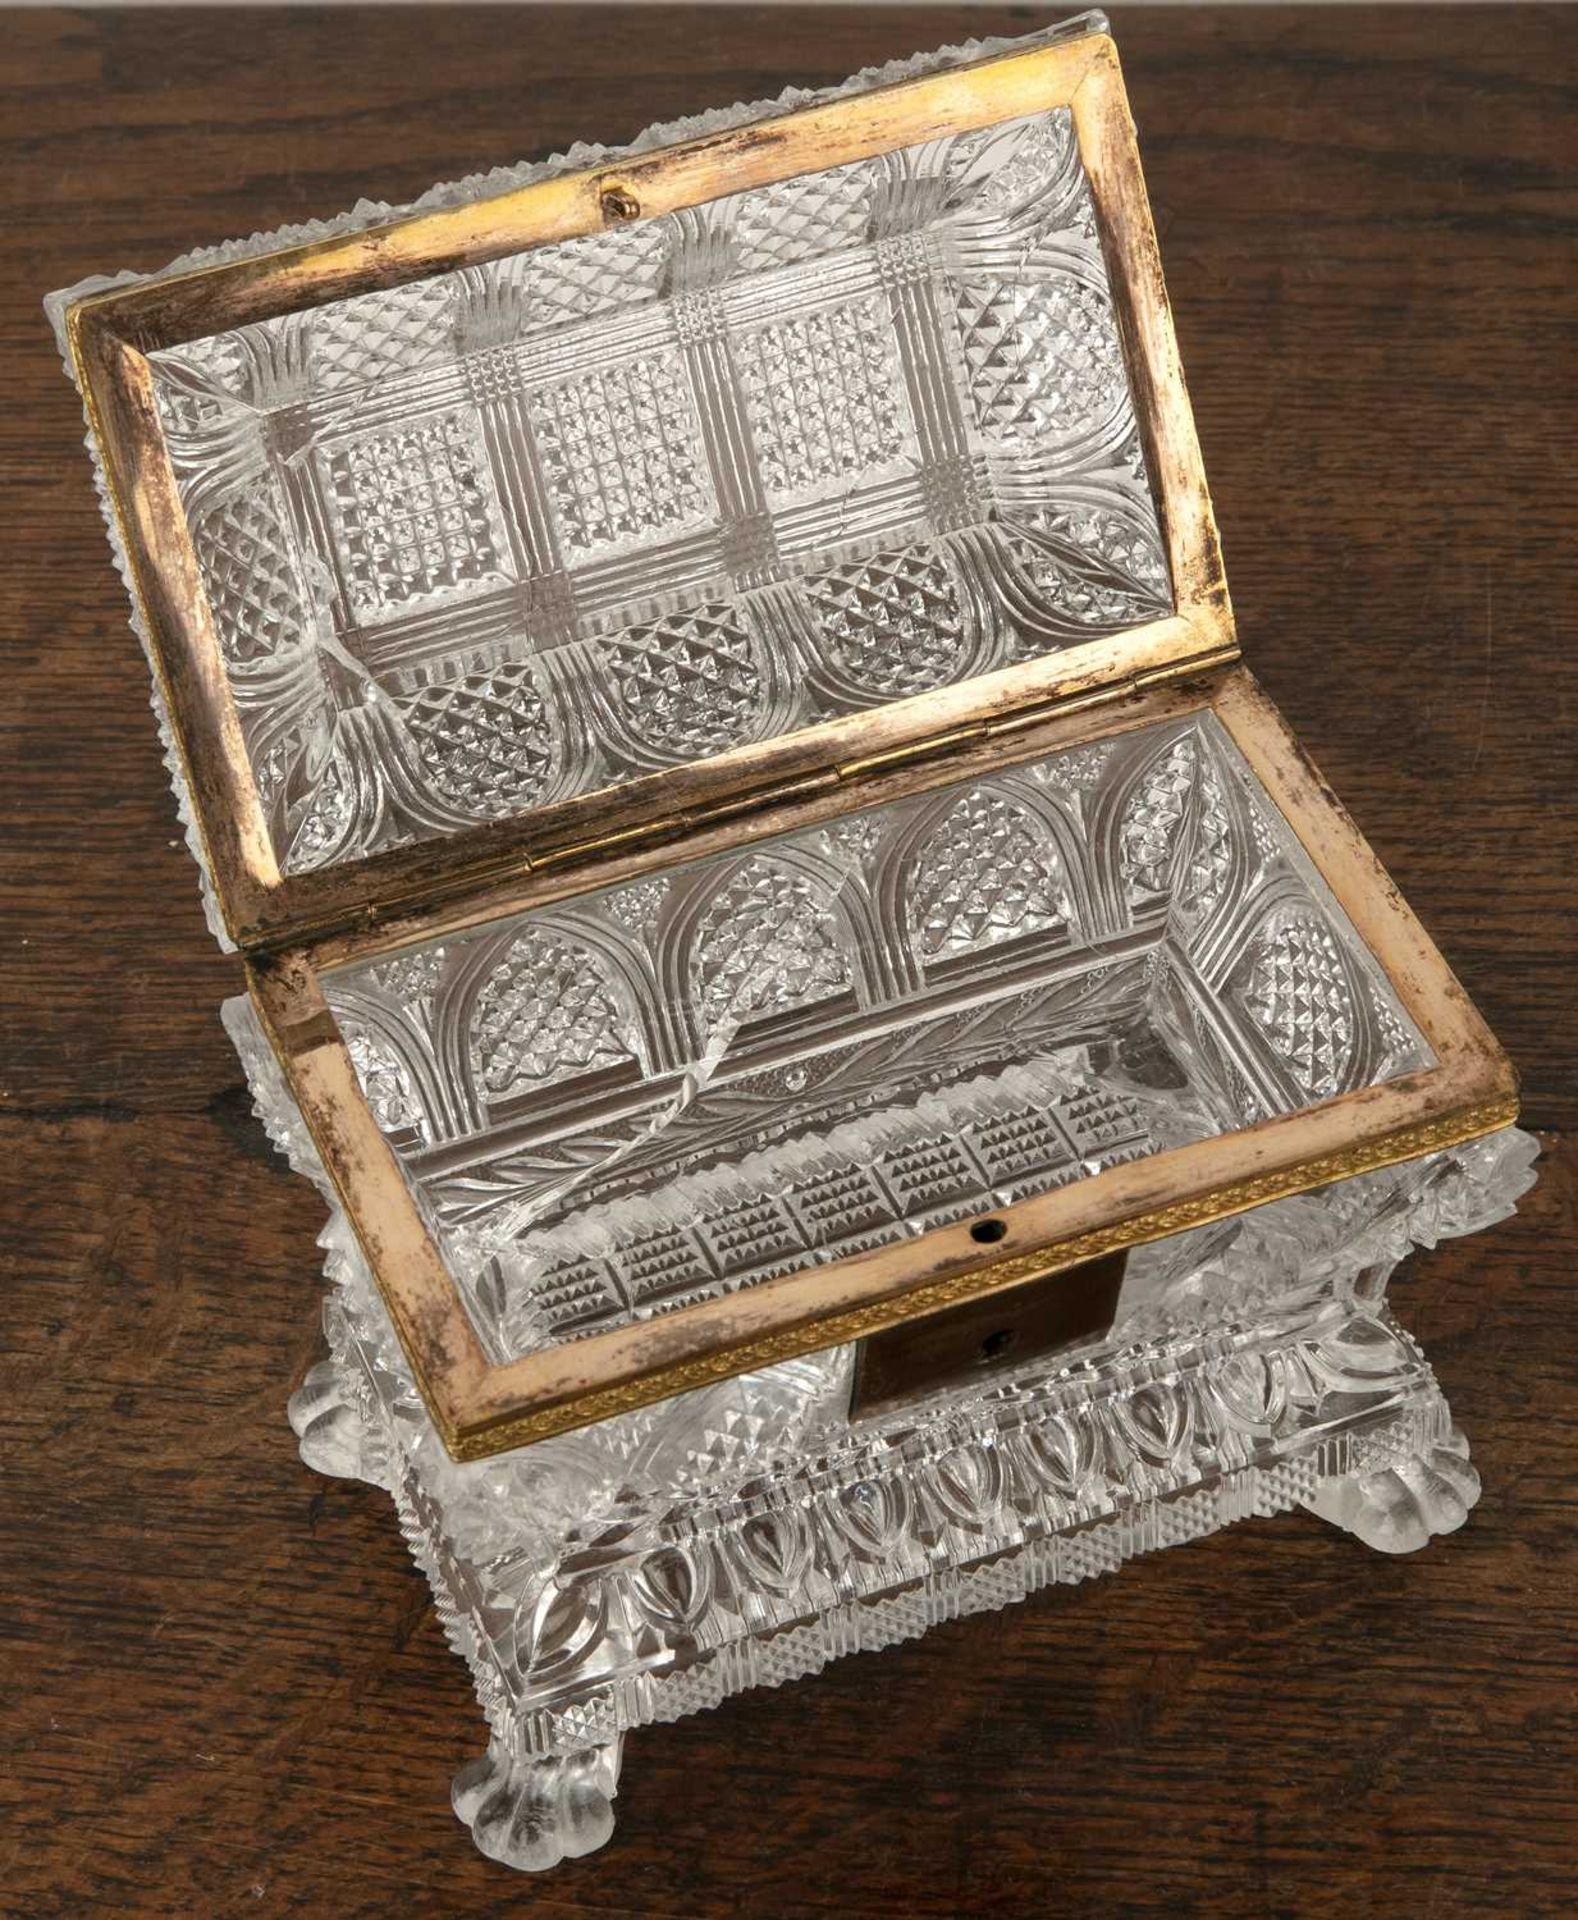 French Charles X style glass casket or coffin with gilt metal mounts on a pressed or moulded glass - Image 5 of 5